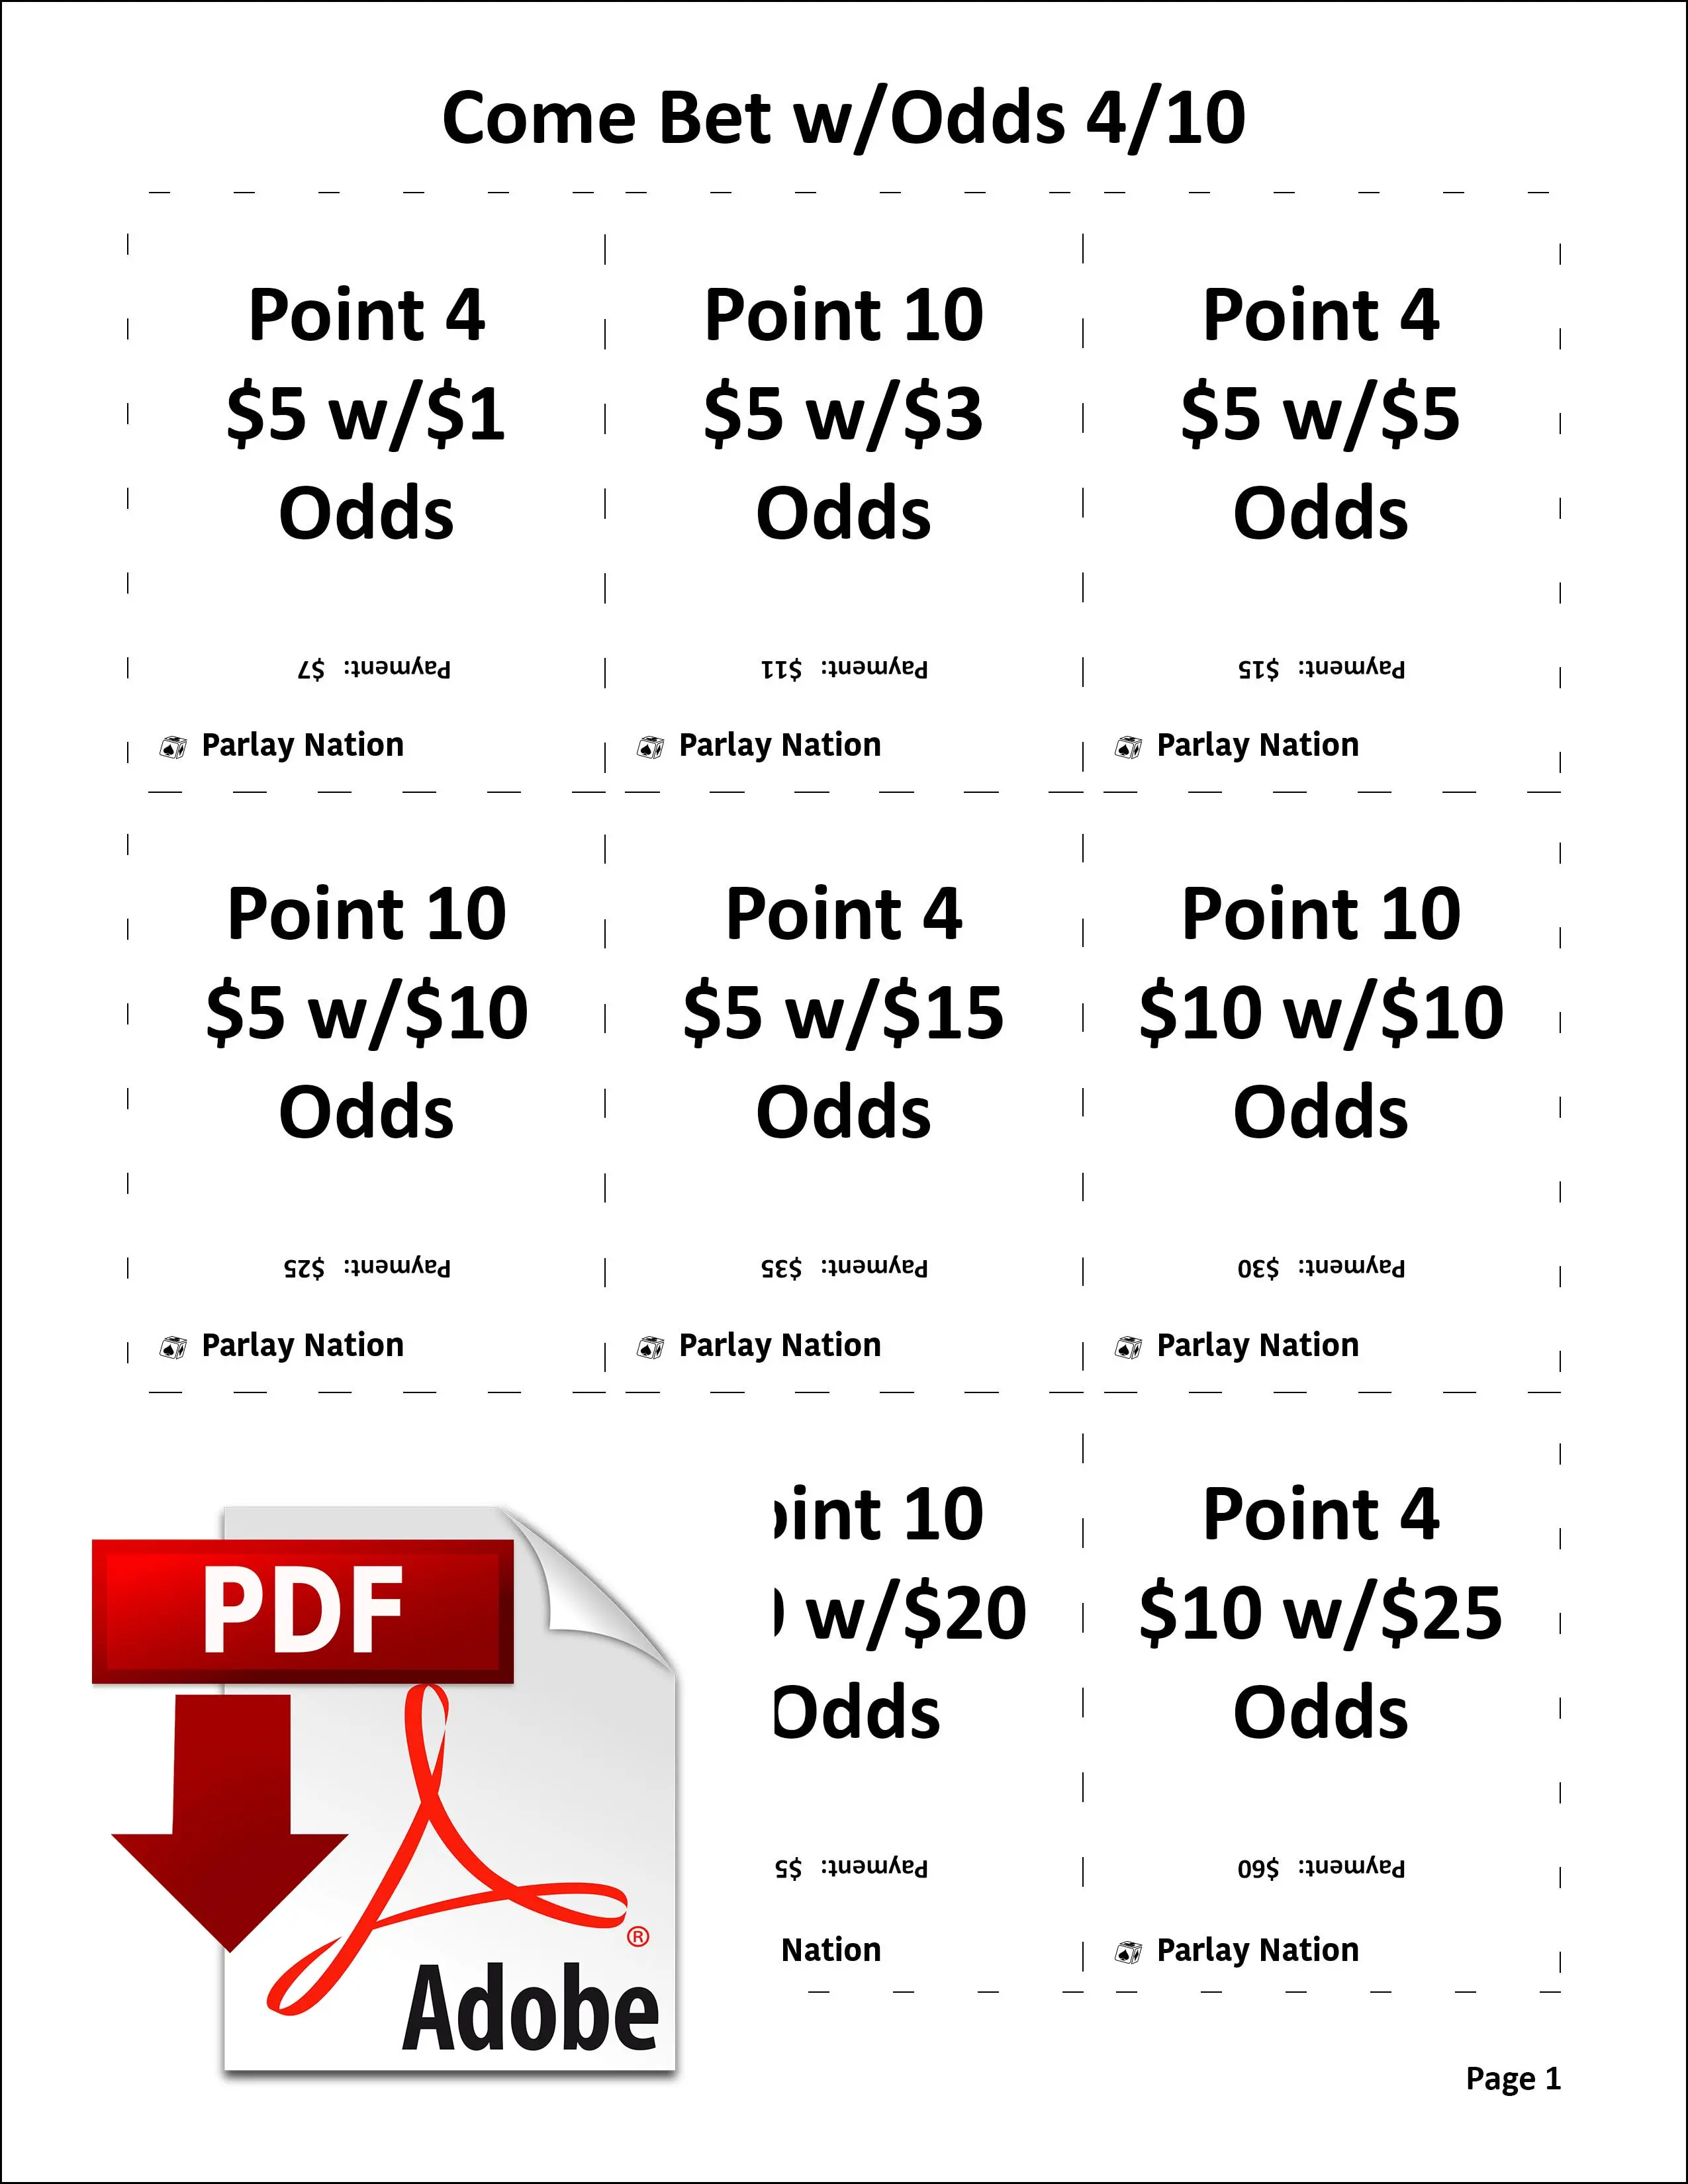 Come Bet w/Odds Payments 4 & 10 cover sheet.